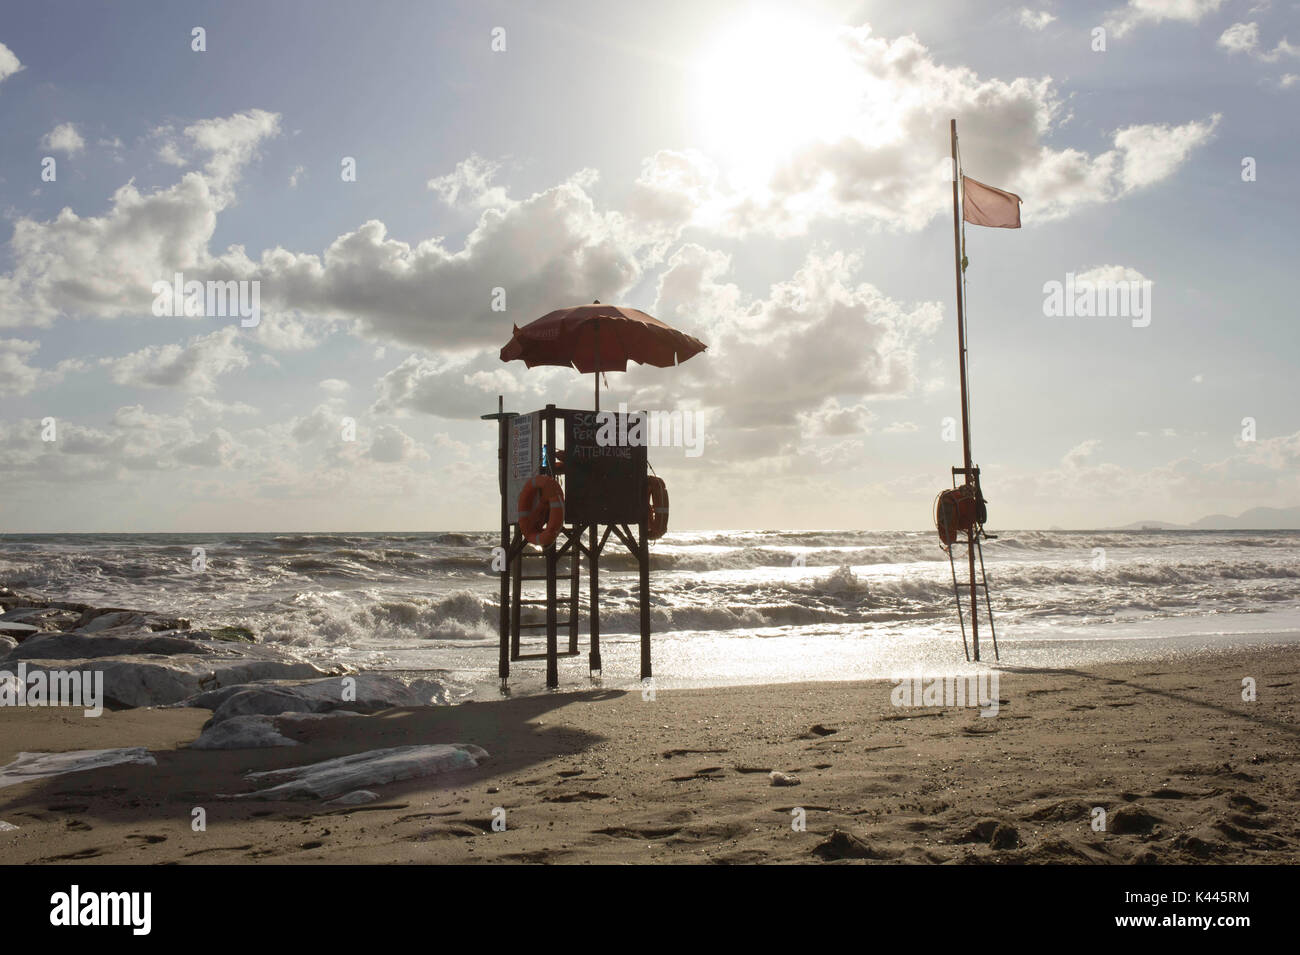 MARINA DI MASSA, ITALY - AUGUST 17 2015: Sunset view of a lifeguard tower at sunset time in Versilia, Italy Stock Photo